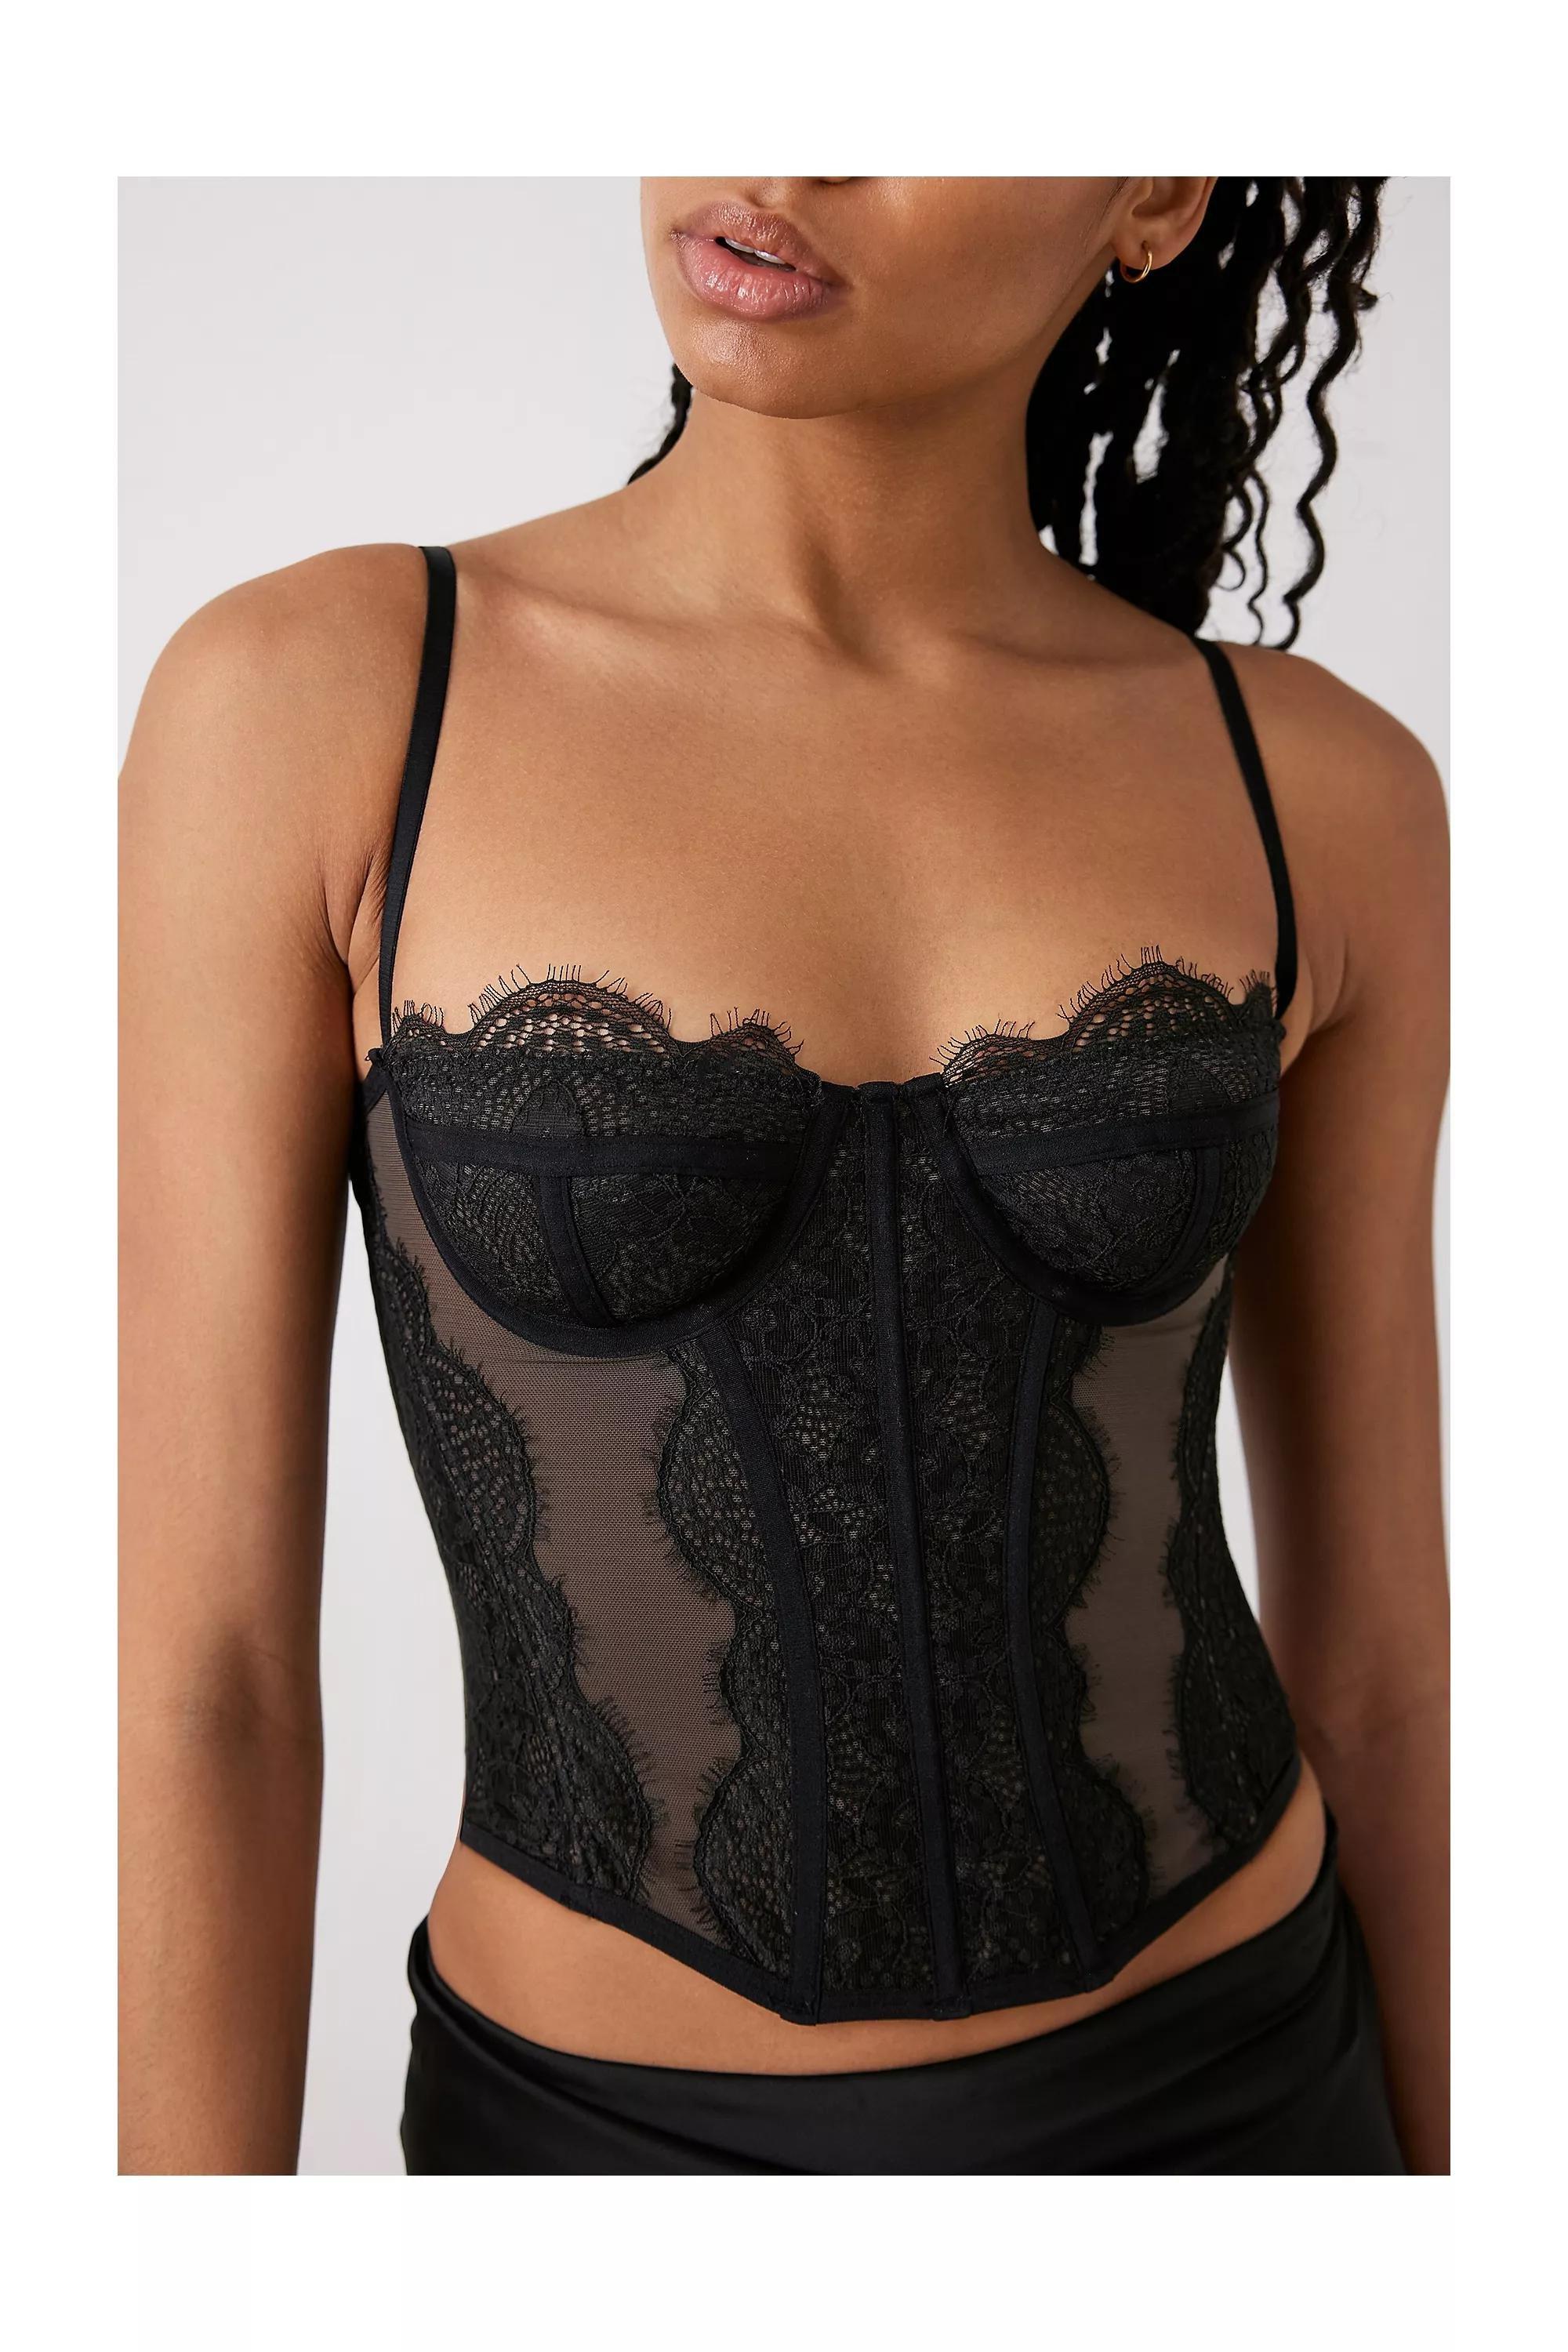 urbanoutfitters modern love corset in size medium has my heart